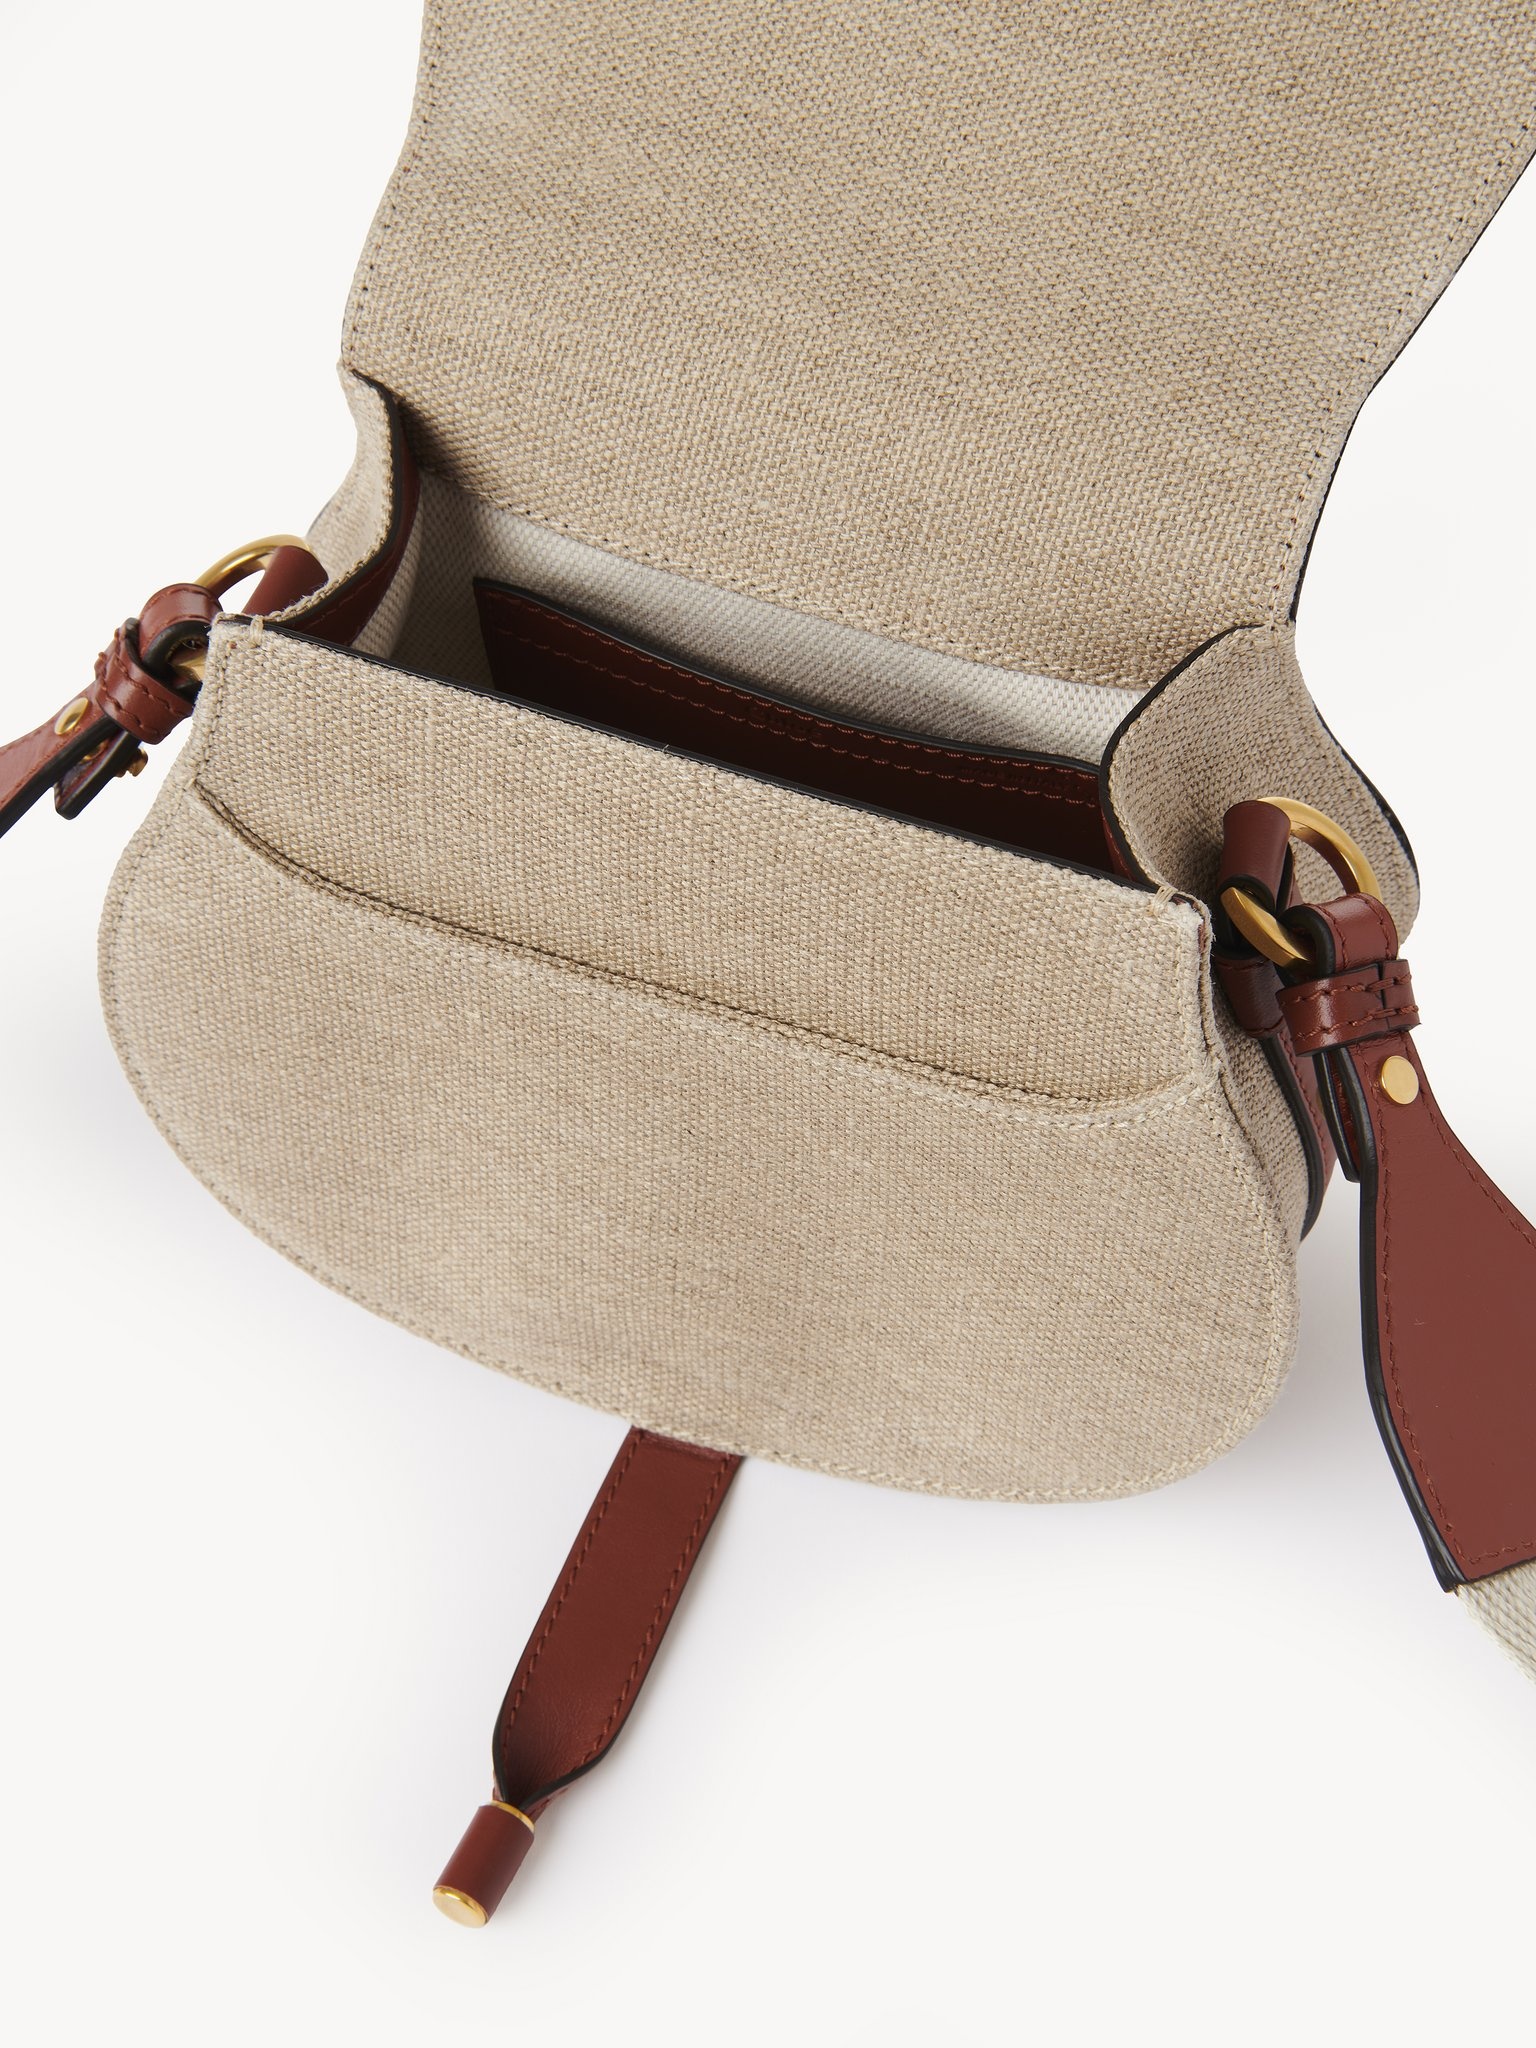 SMALL MARCIE SADDLE BAG IN LINEN & SMOOTH LEATHER - 5